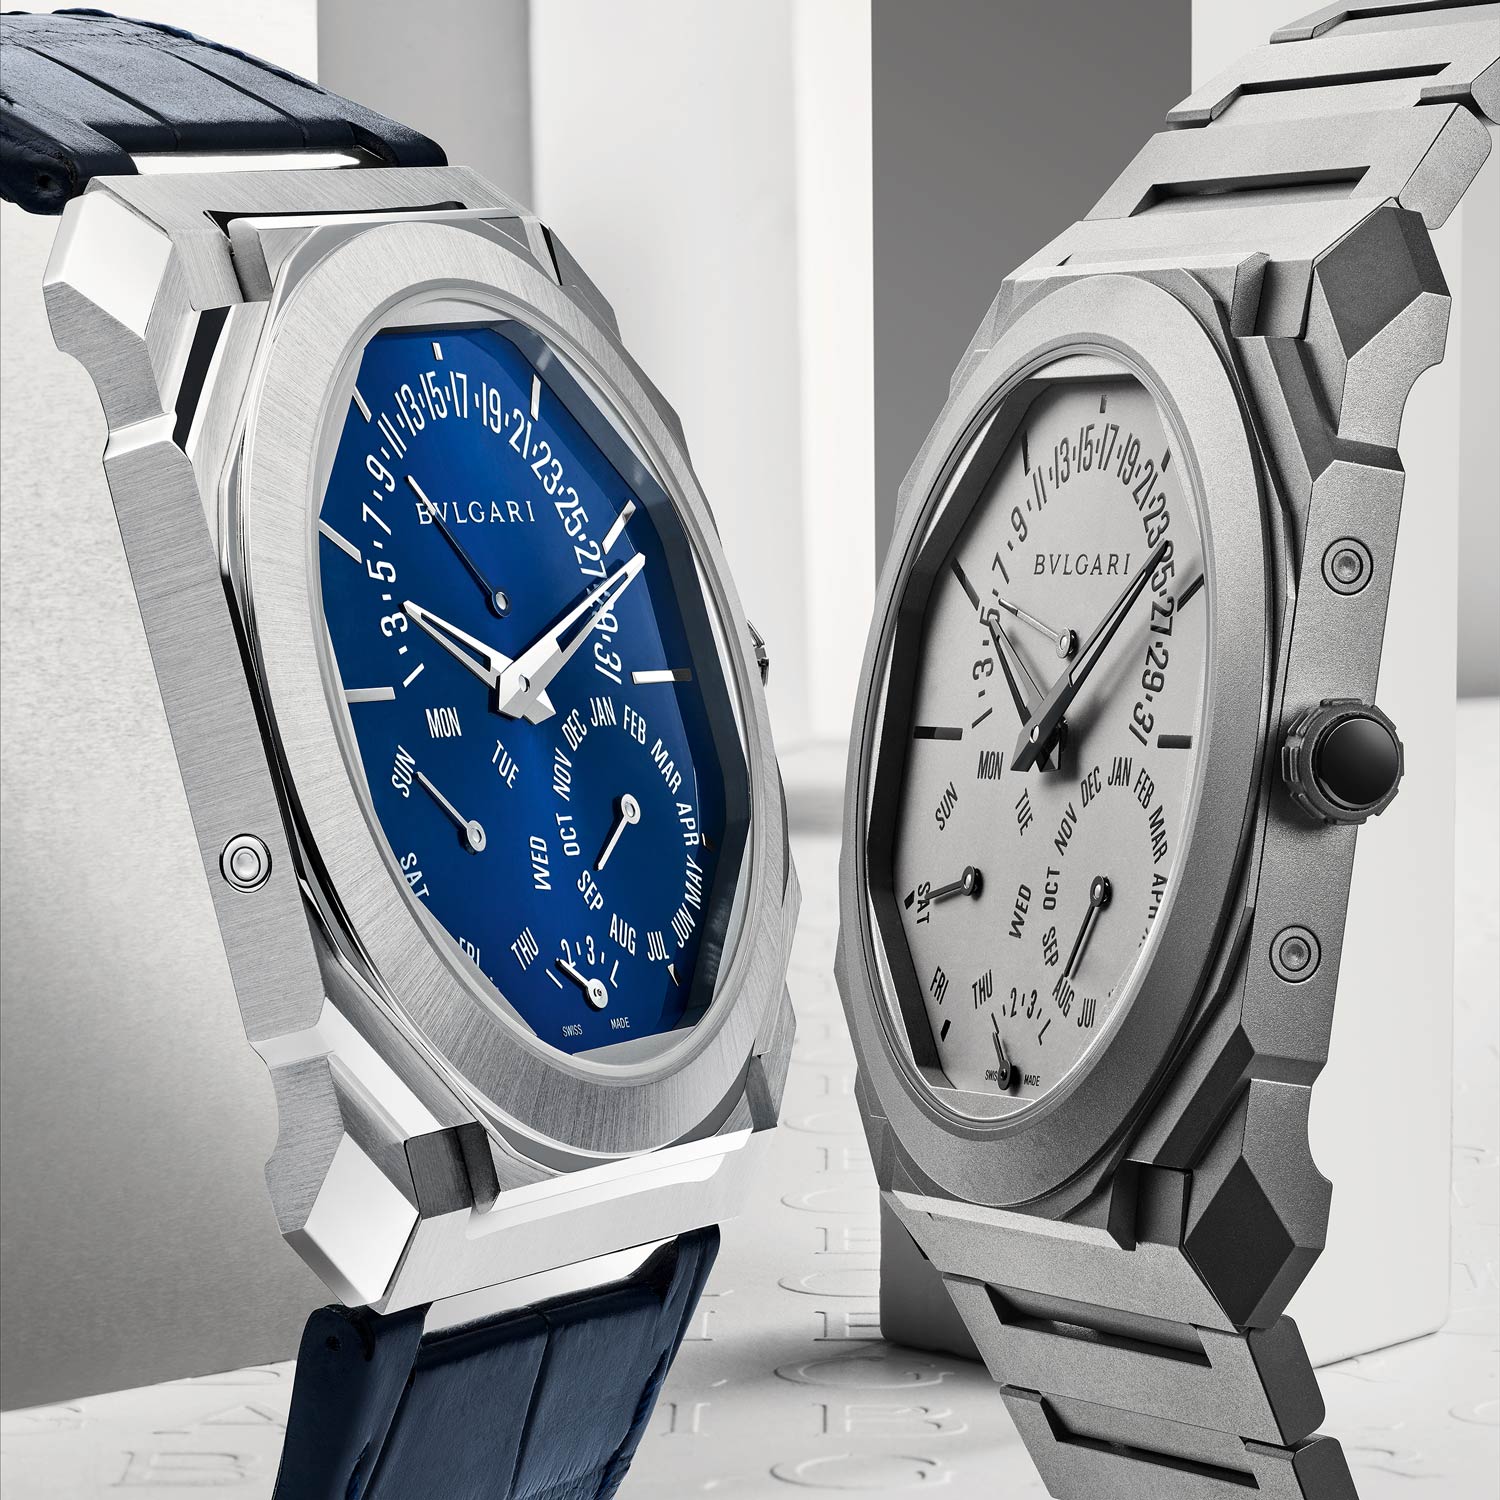 The new 2021 Octo Finissimo Perpetual Calendar is offered in two versions: sandblasted titanium, which is a signature look for the brand, and a platinum version with a blue lacquered dial on a blue alligator strap